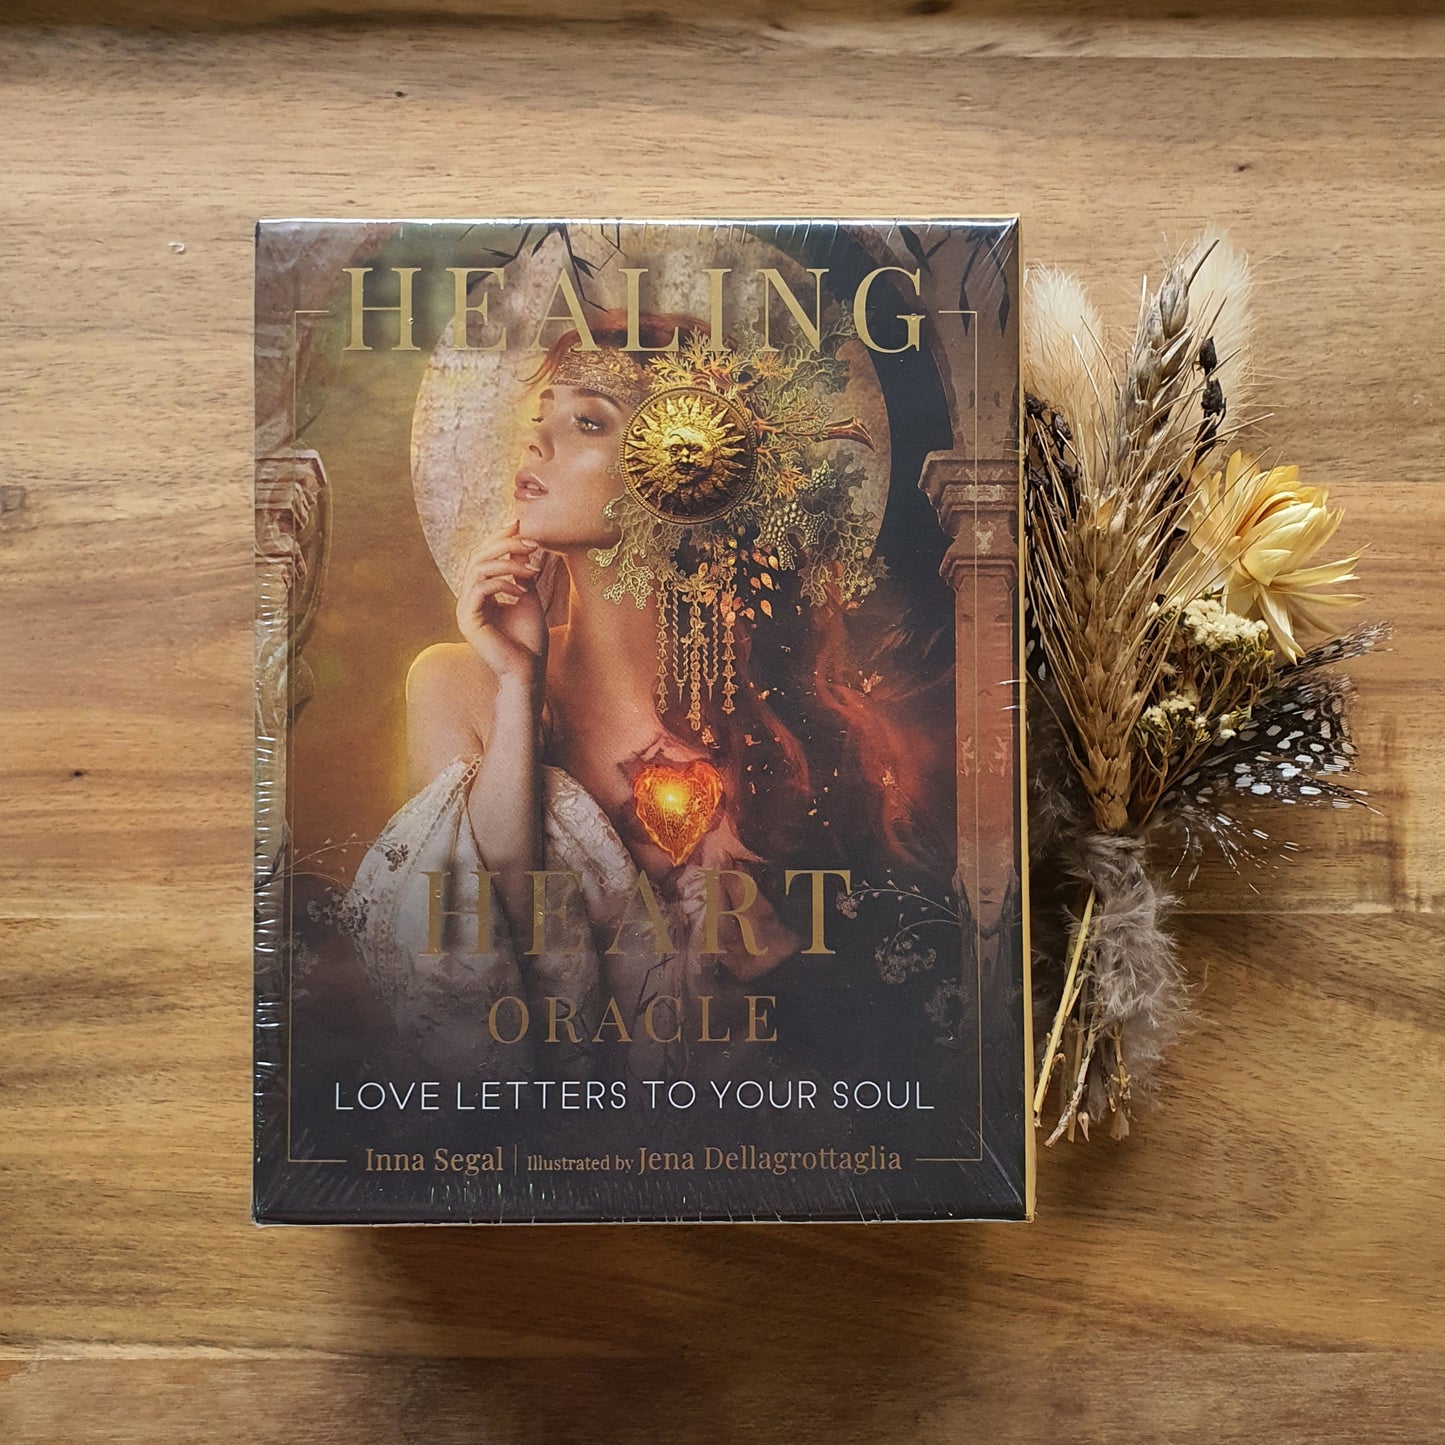 Healing Heart Oracle: Love Letters to Your Soul